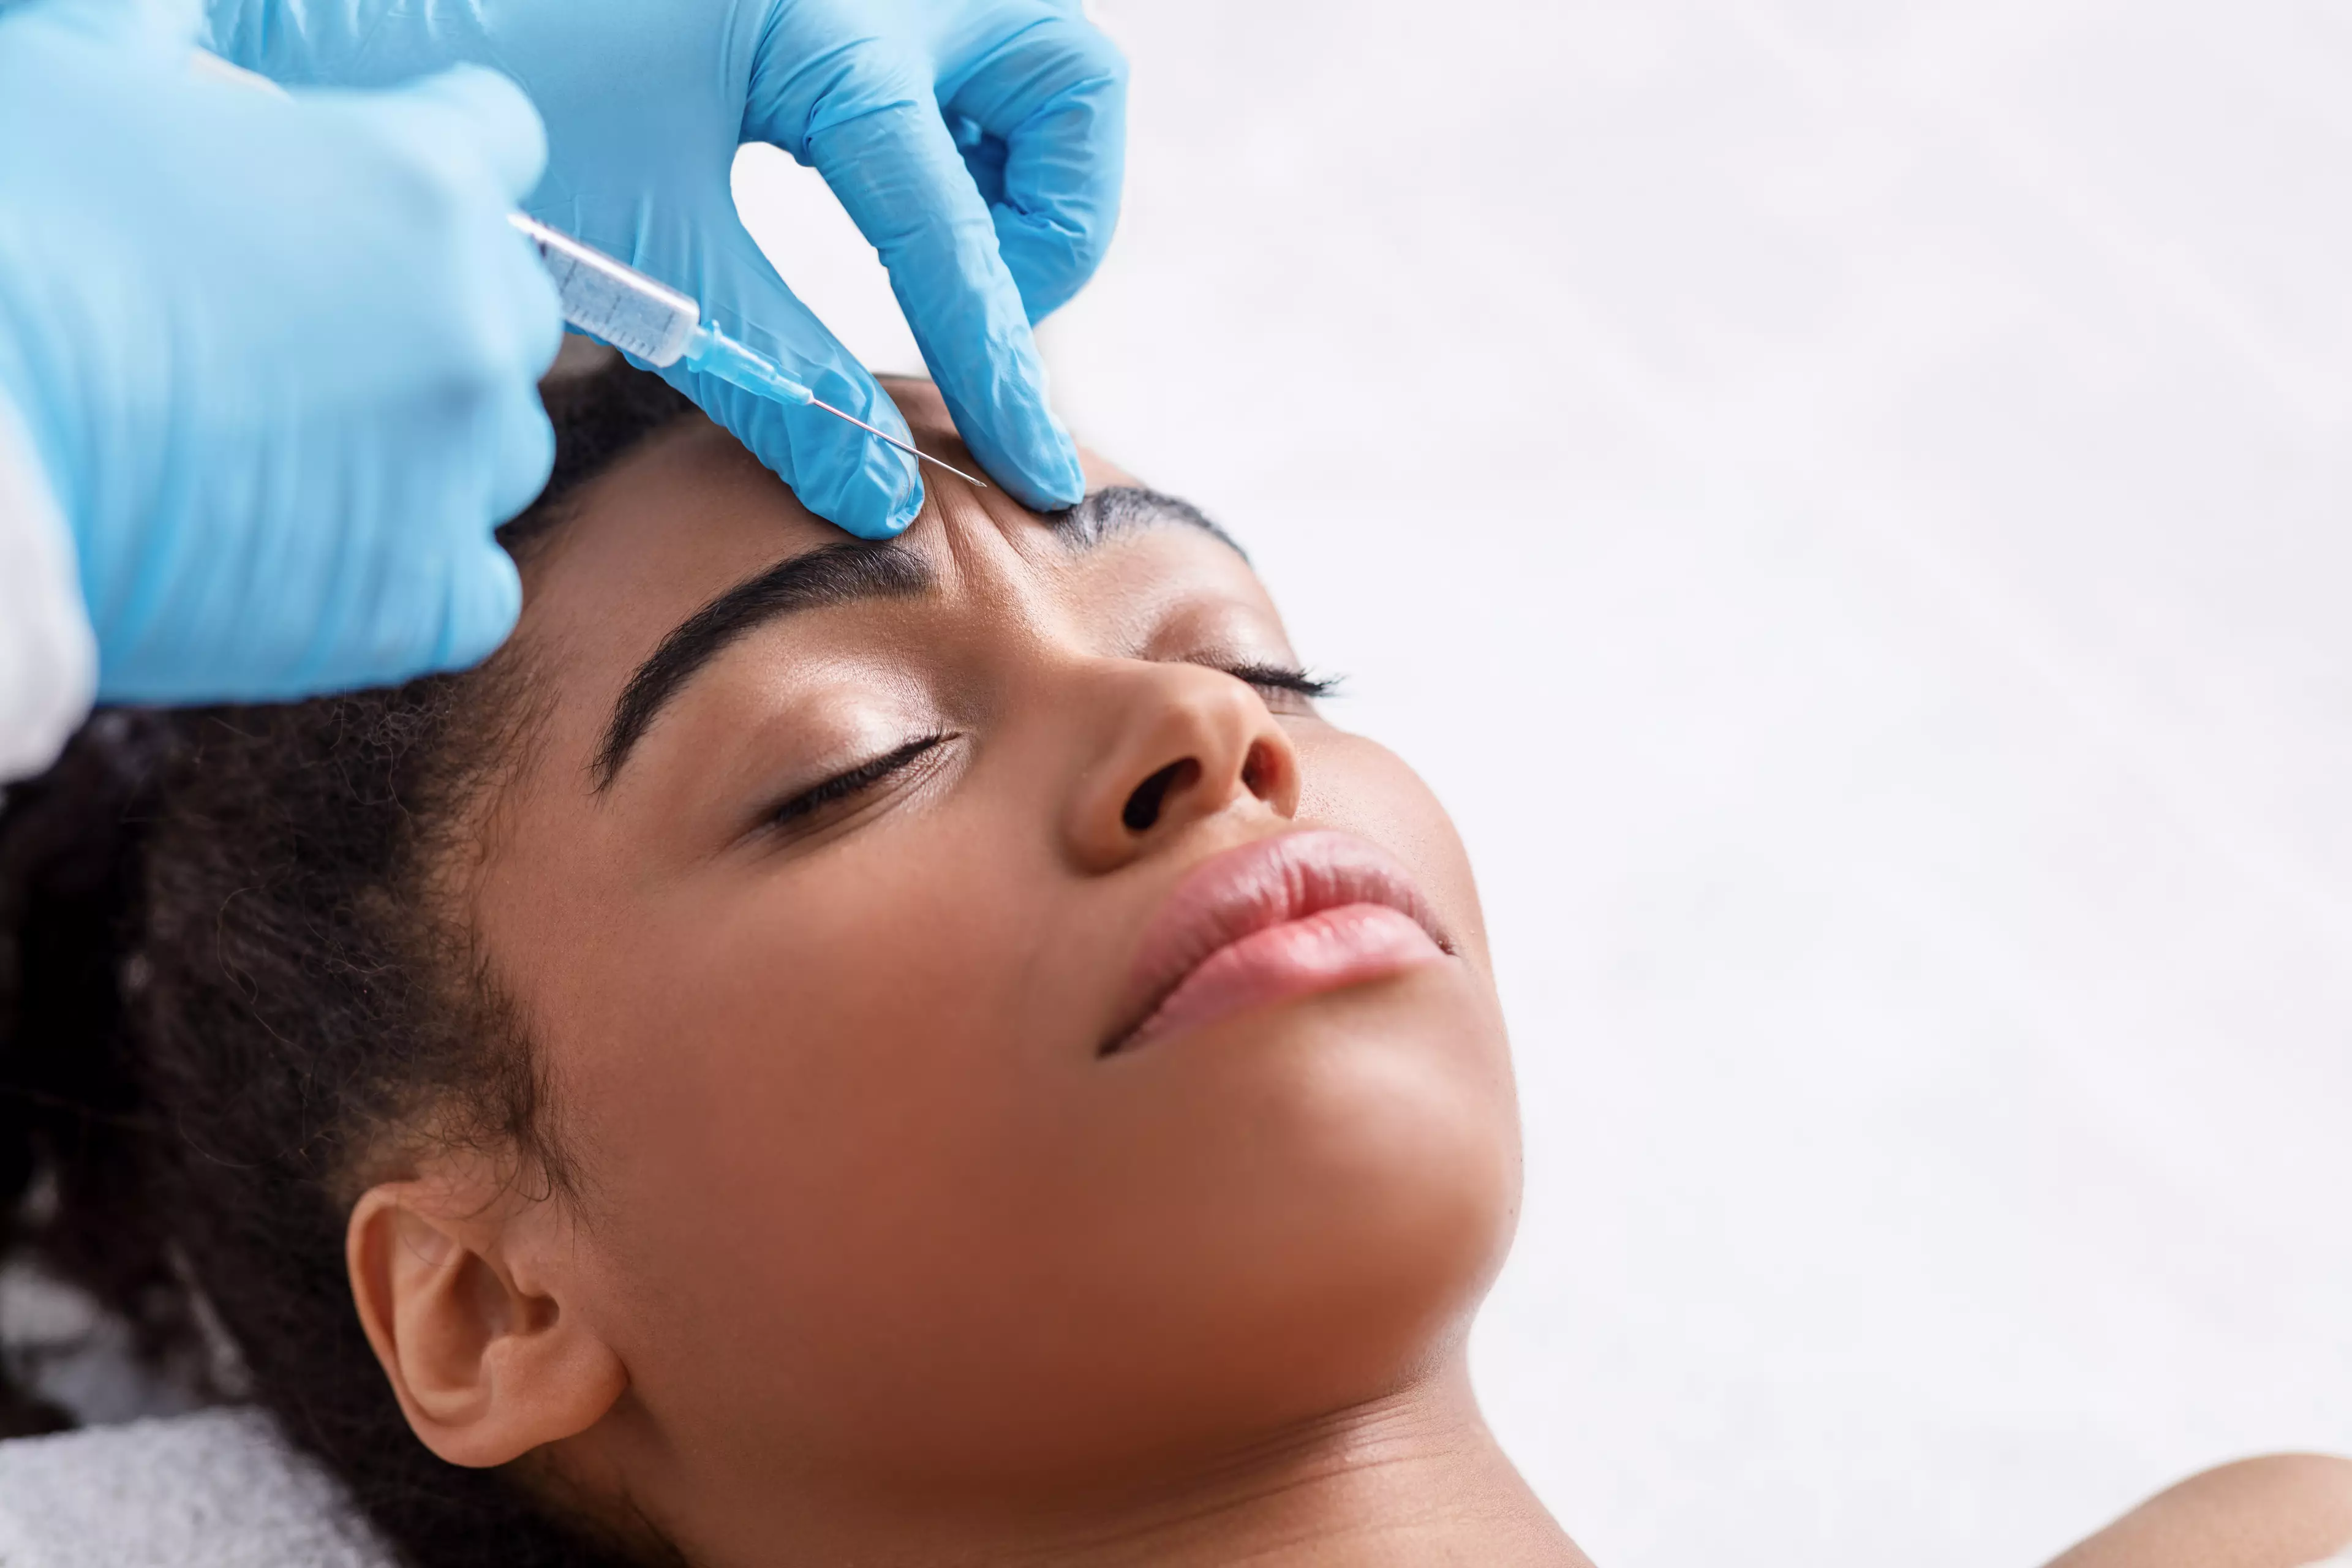 Botox and fillers will now be more regulated (